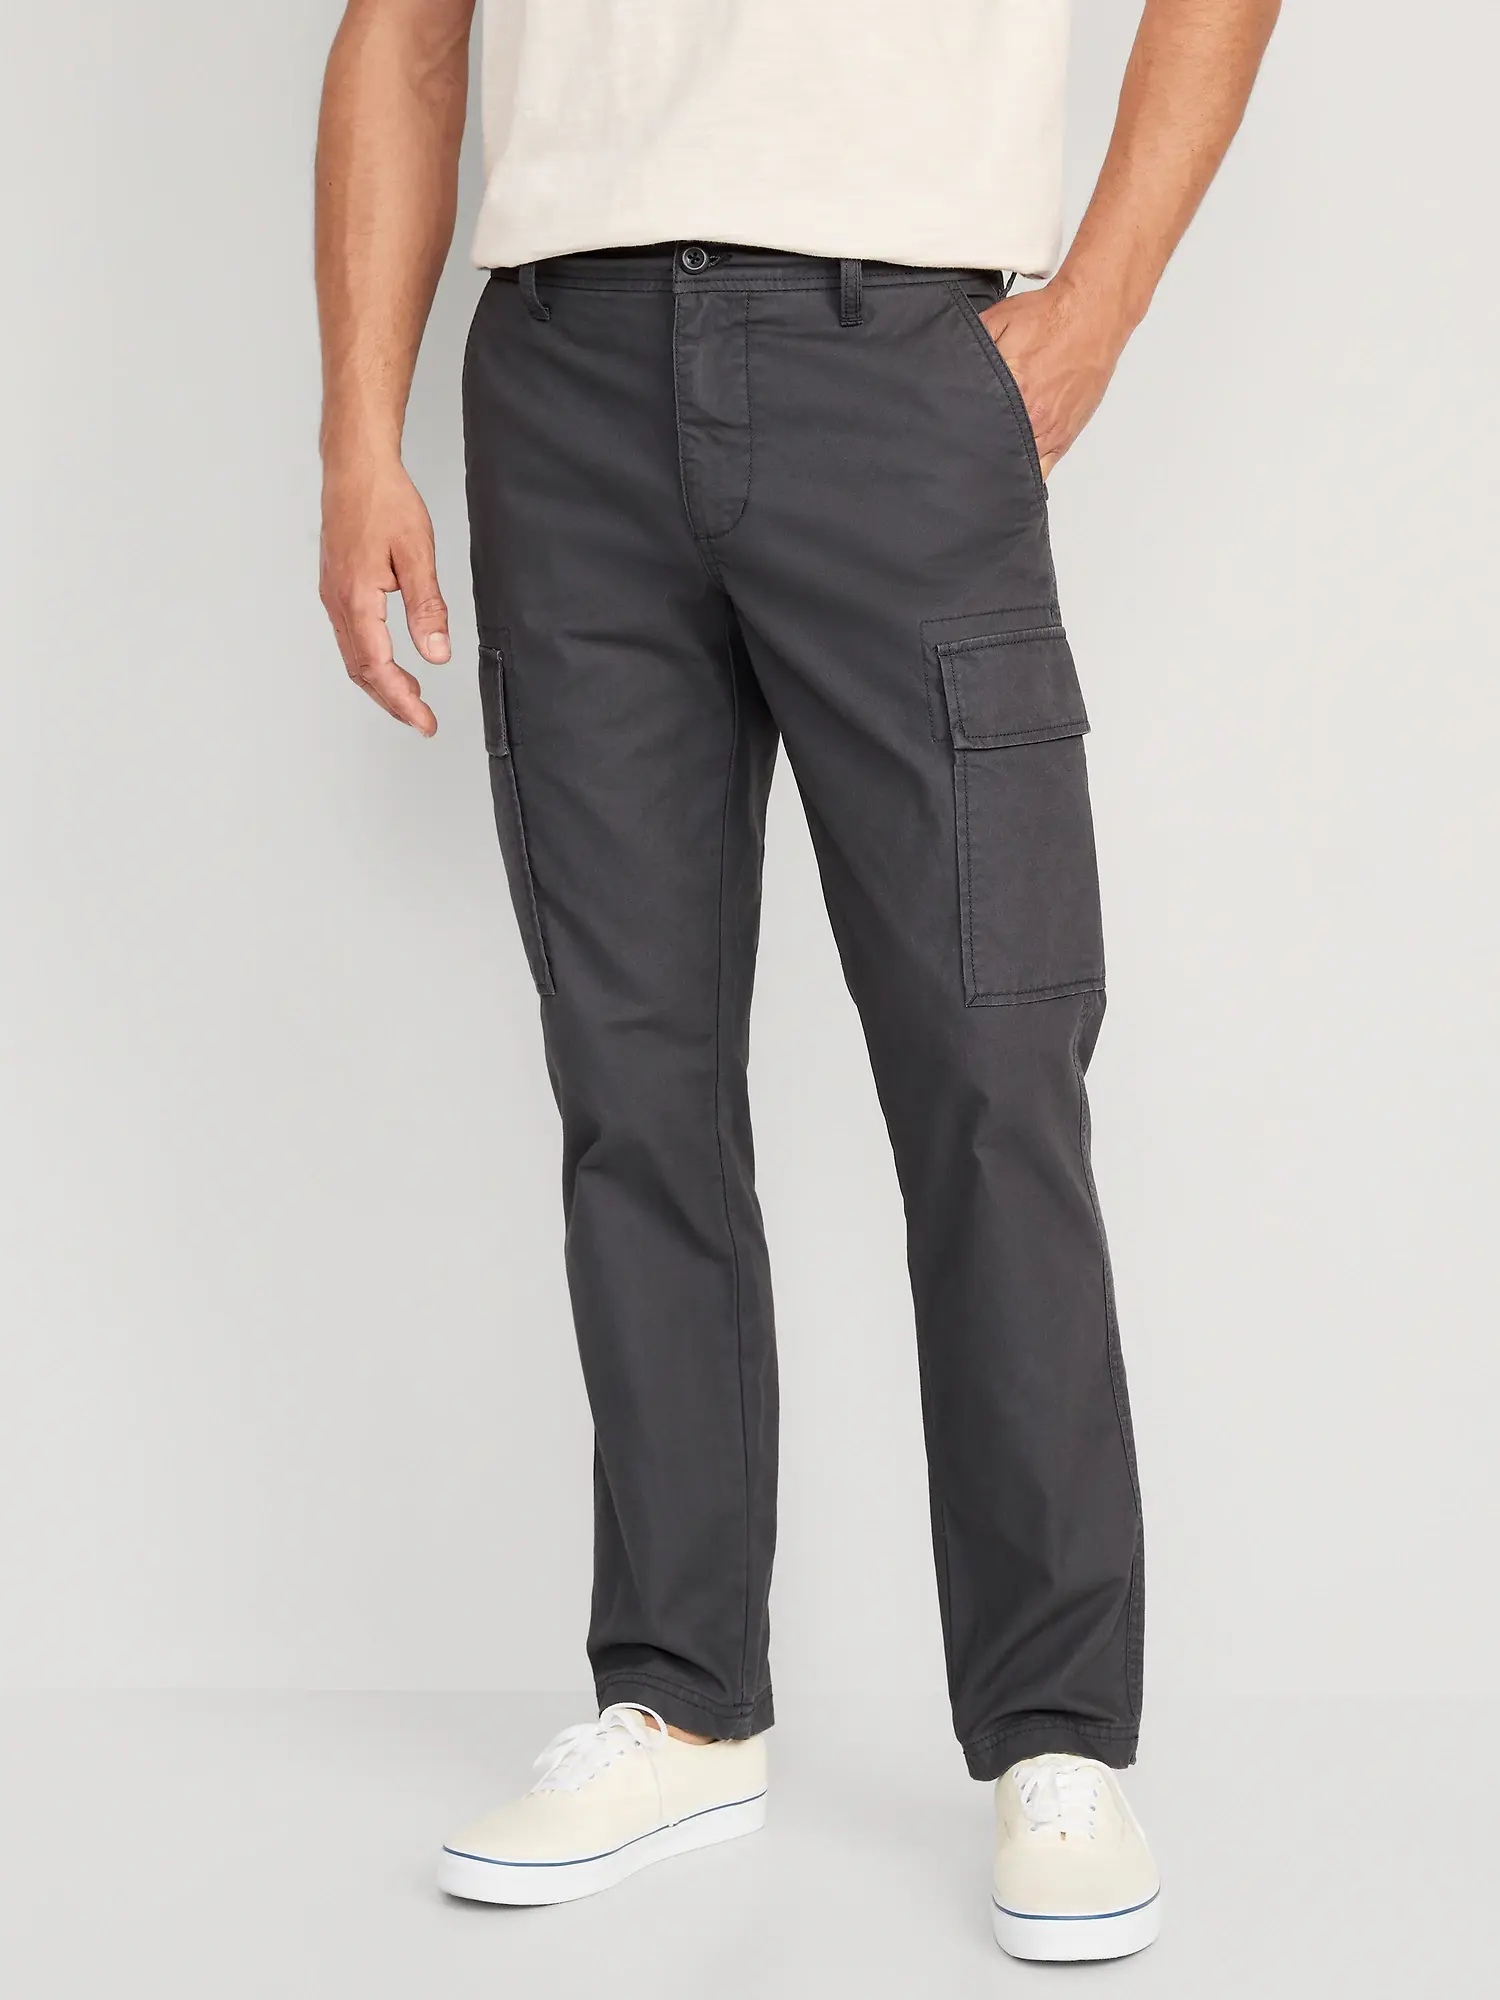 Old Navy Straight Oxford Cargo Pants black. 1